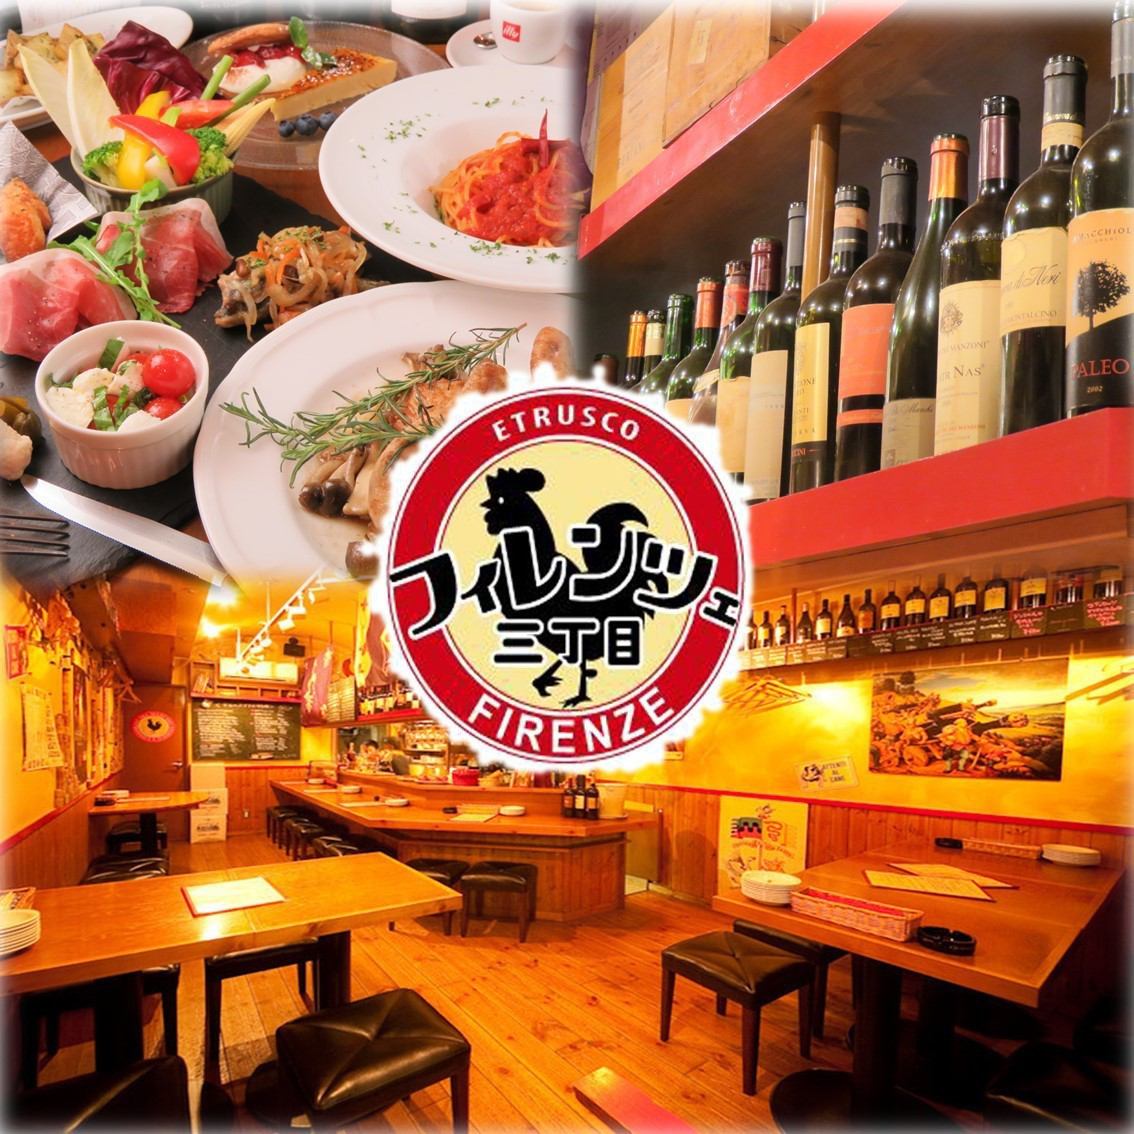 Authentic Italian bar where you can enjoy local Italian cuisine and genuine wines imported directly from Italy